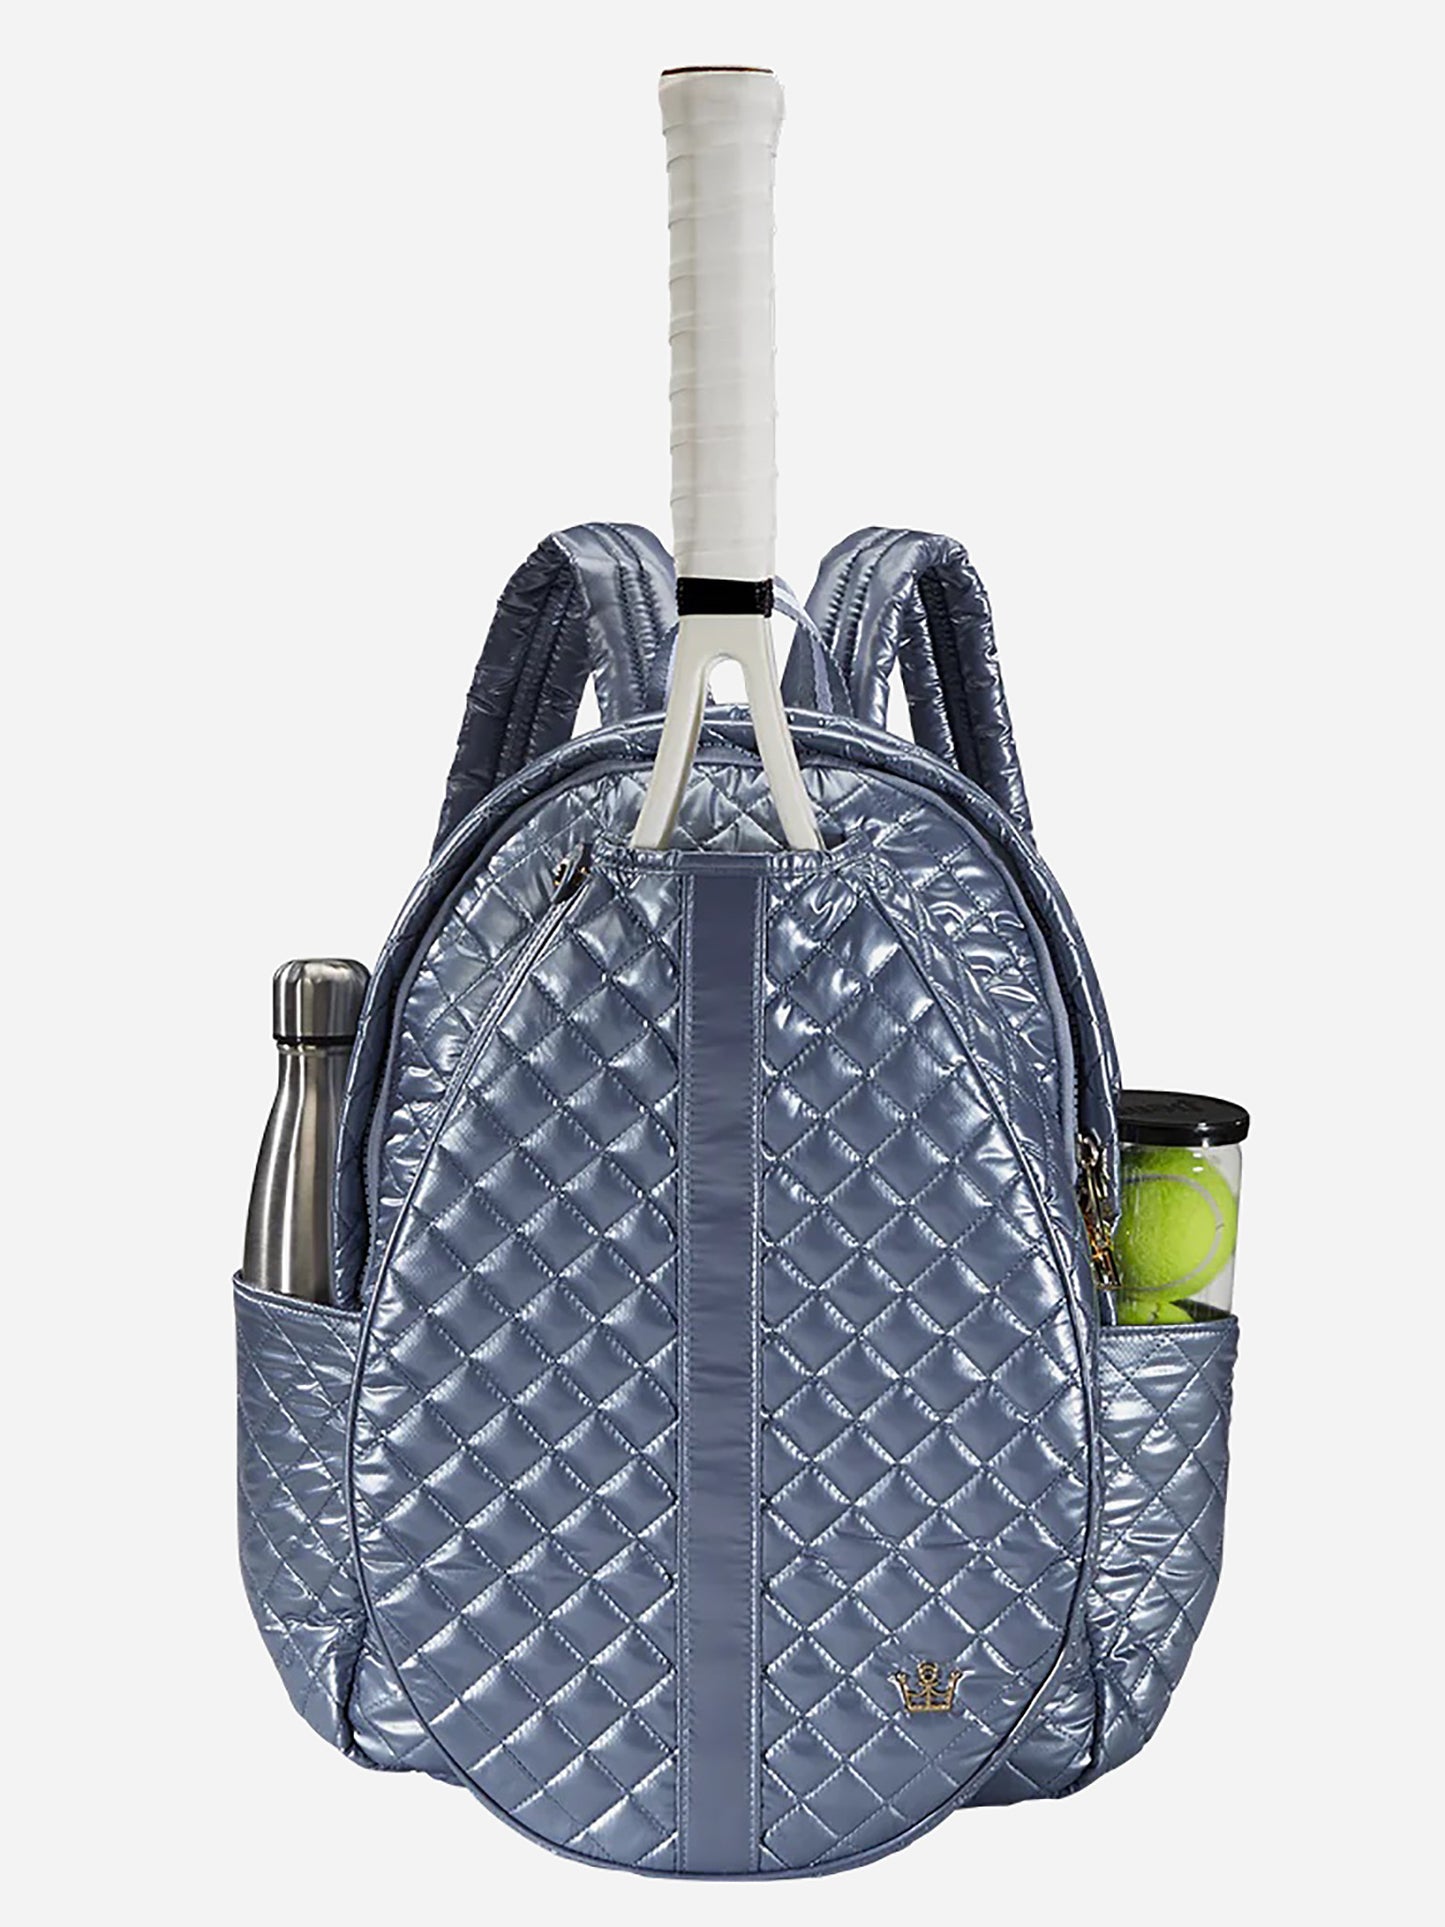 Oliver Thomas 24 + 7 Tennis Backpack